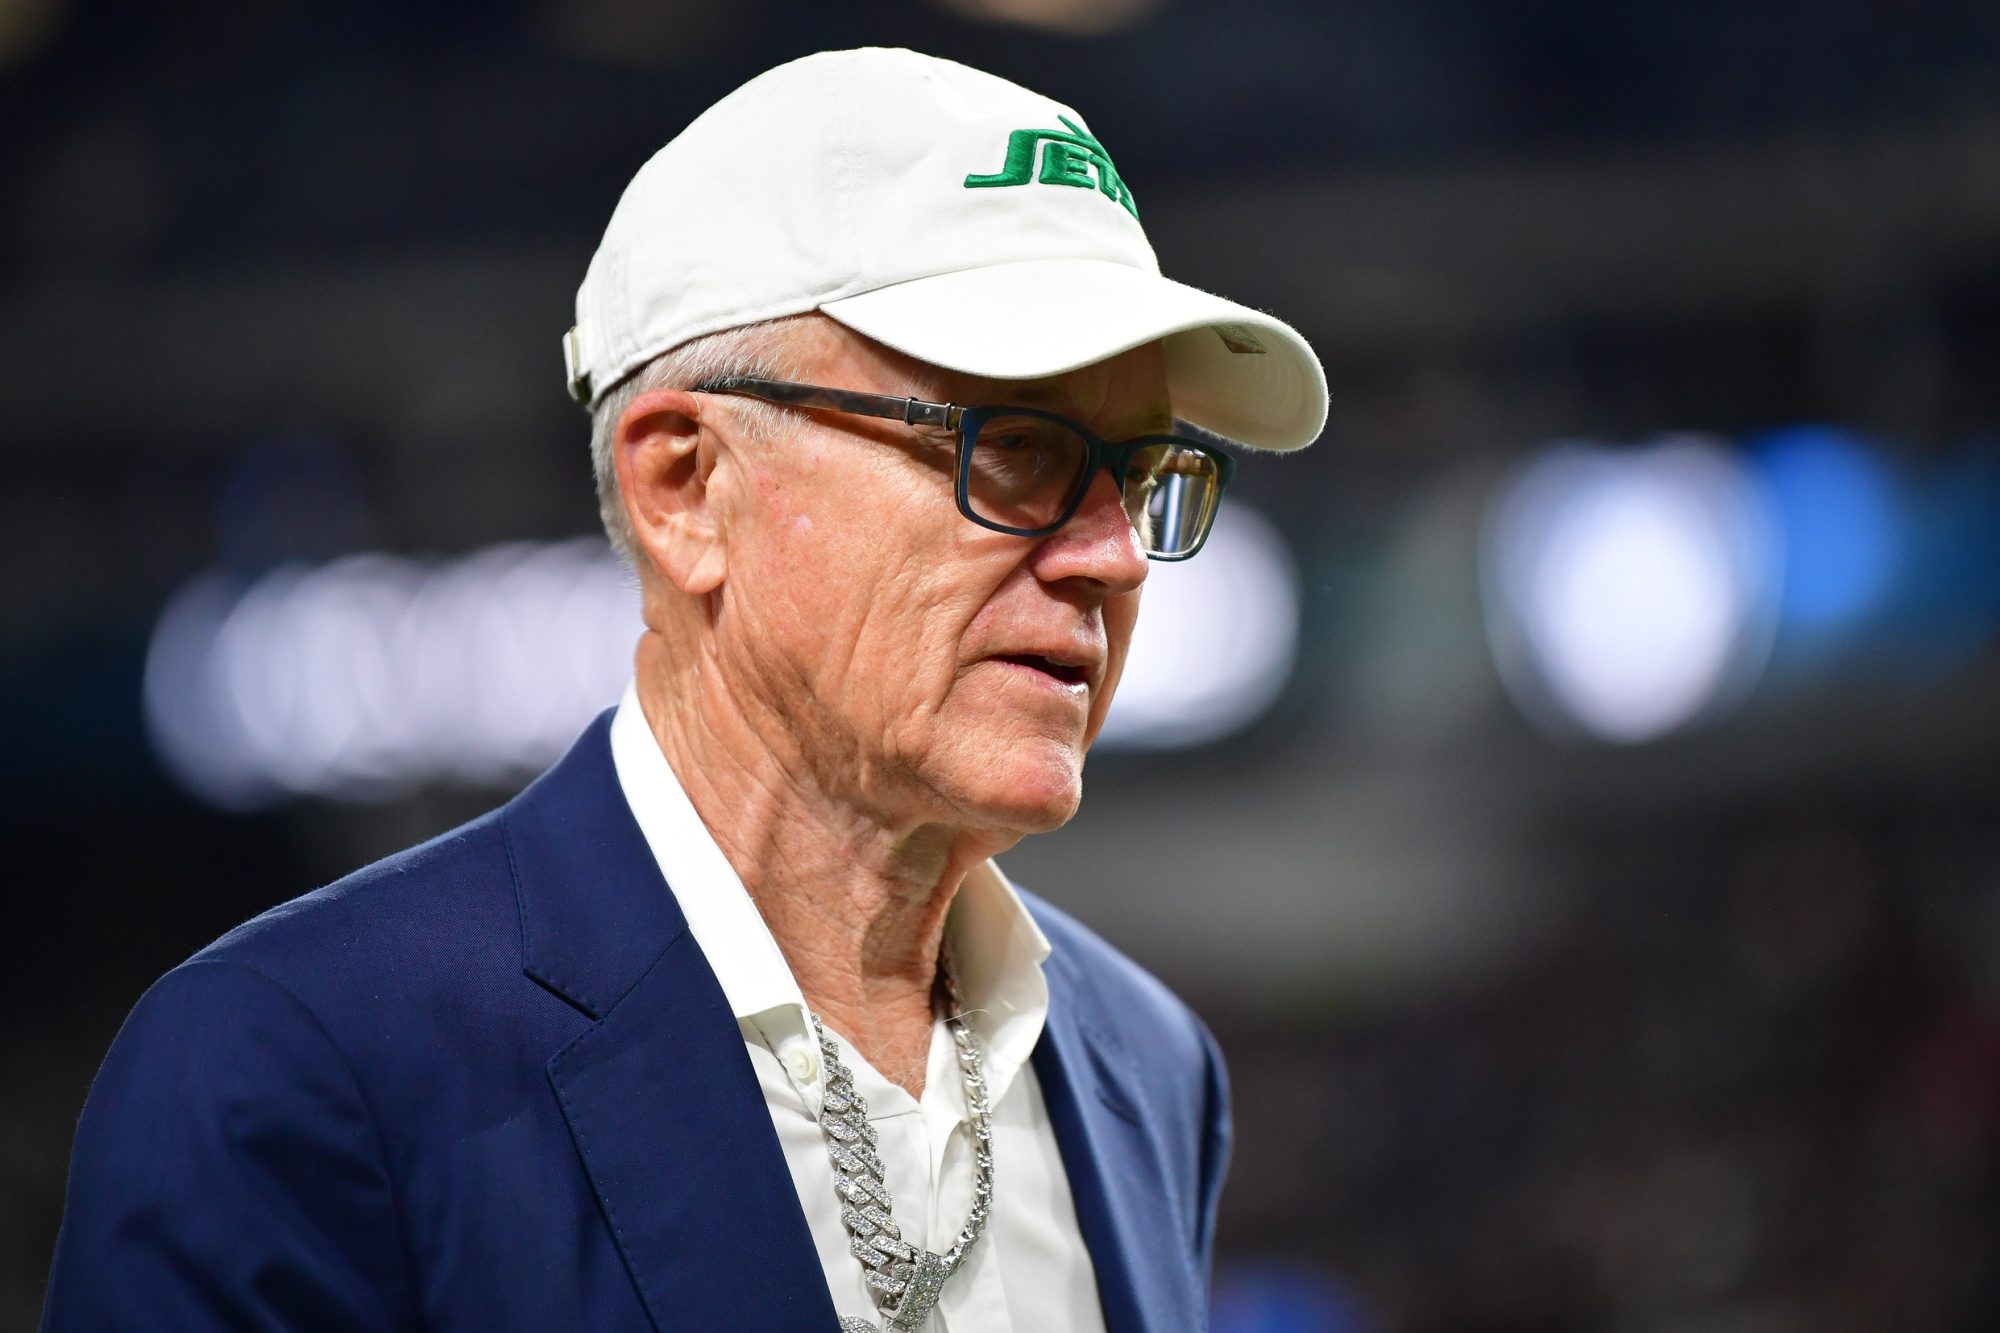 Jets Owner Blasts ‘False’ Reporting From League-Owned Outlet